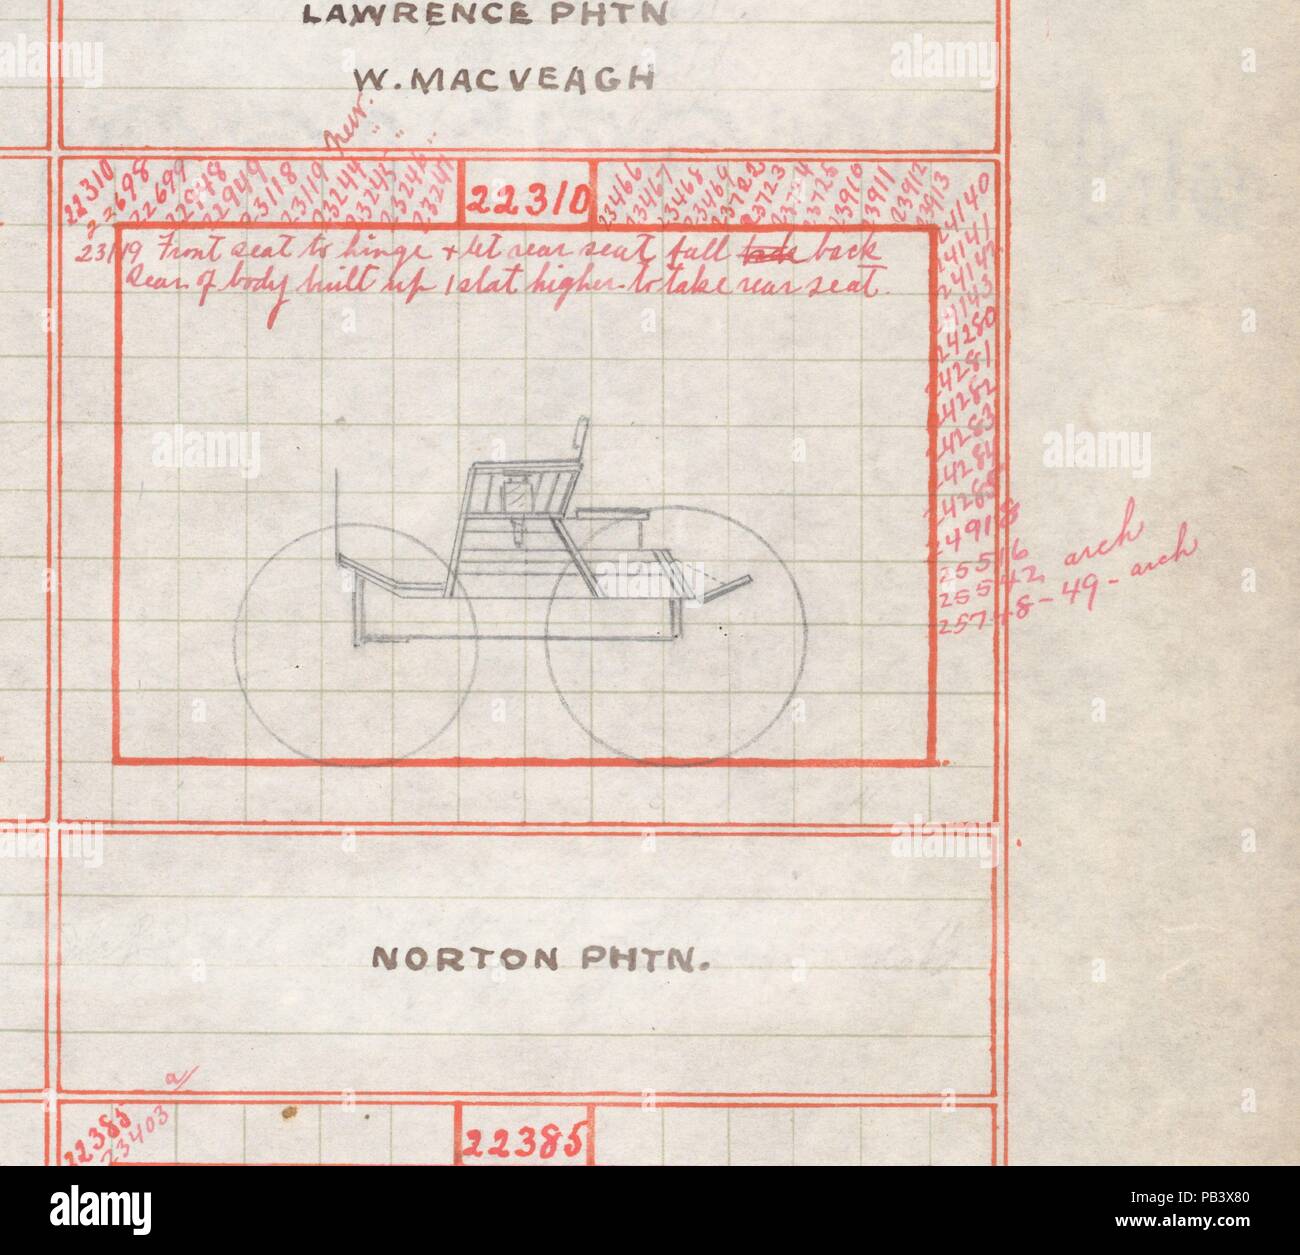 Carriage Draft Book 1893-1905. Dimensions: 14 × 3/4 × 17 in. (35.6 × 1.9 × 43.2 cm). Manufacturer: Brewster & Co. (American, New York). Date: 1893-1905.  Brewster & Company History  Established in 1810 by James Brewster (1788-1866) in New Haven, Connecticut, Brewster & Company, specialized in the manufacture of fine carriages. The founder opened a New York showroom in 1827 at 53-54 Broad Street, and the company flourished under generations of family leadership. Expansion necessitated moves around lower Manhattan, with name changes reflecting shifts of management-James Brewster & Sons operated  Stock Photo